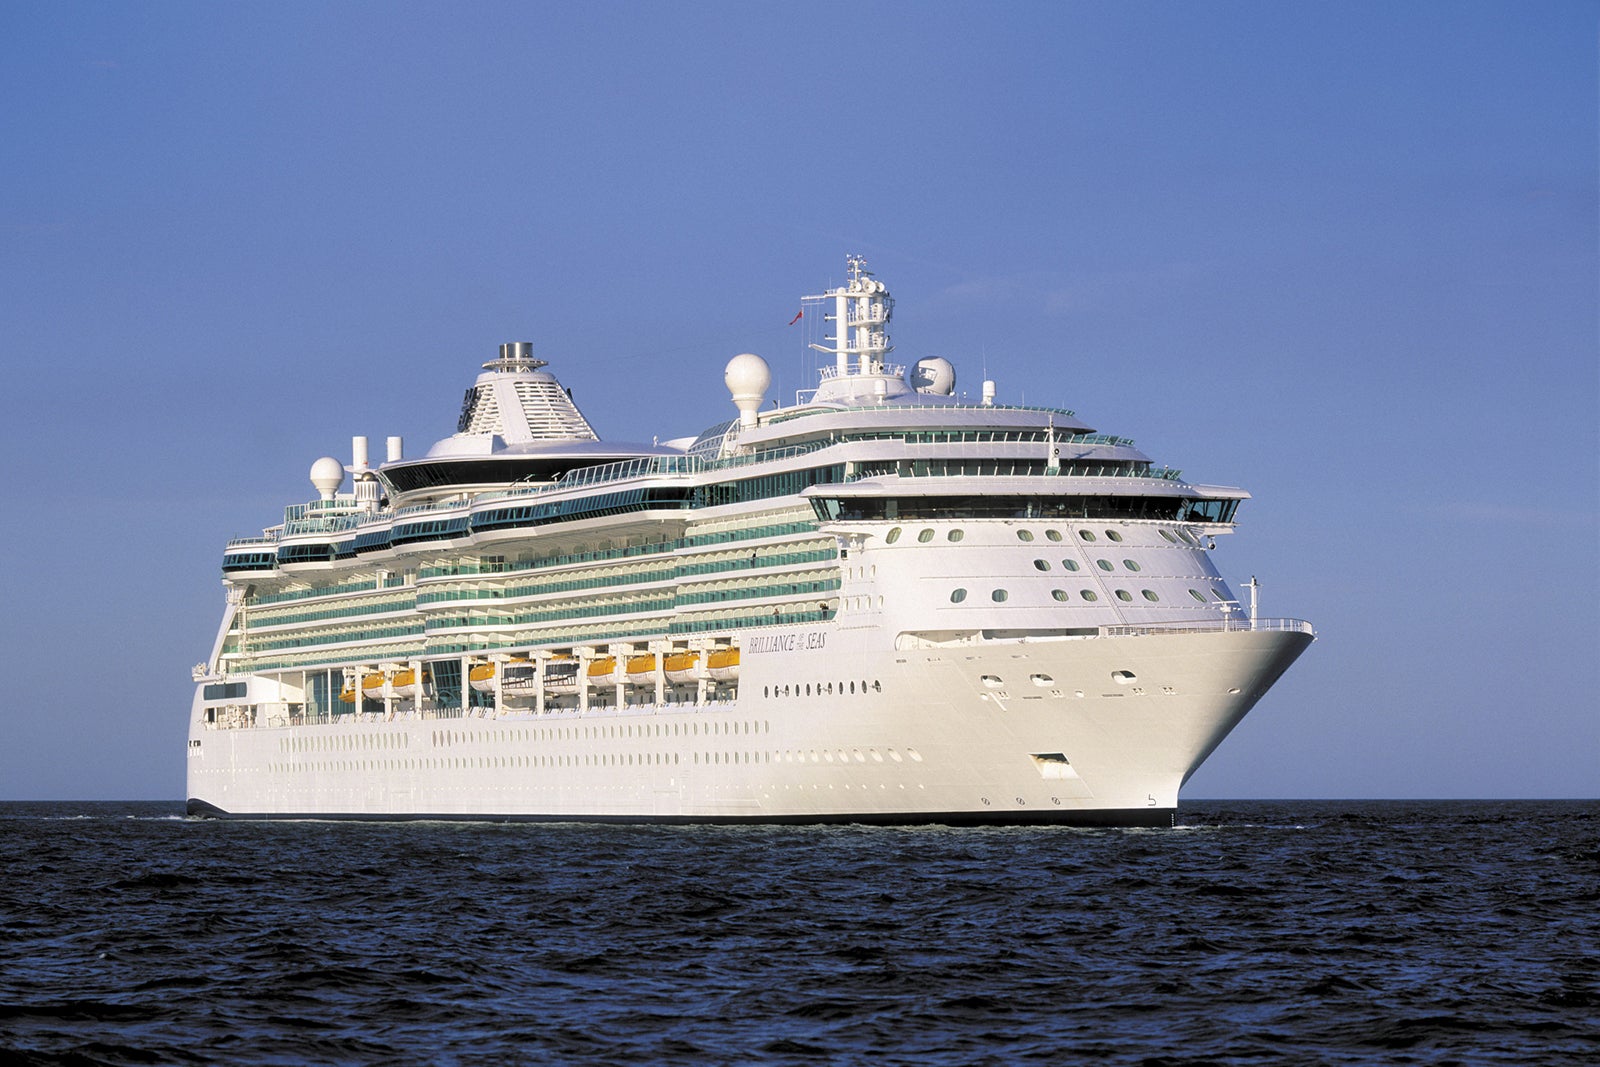 voyager of the seas launch date